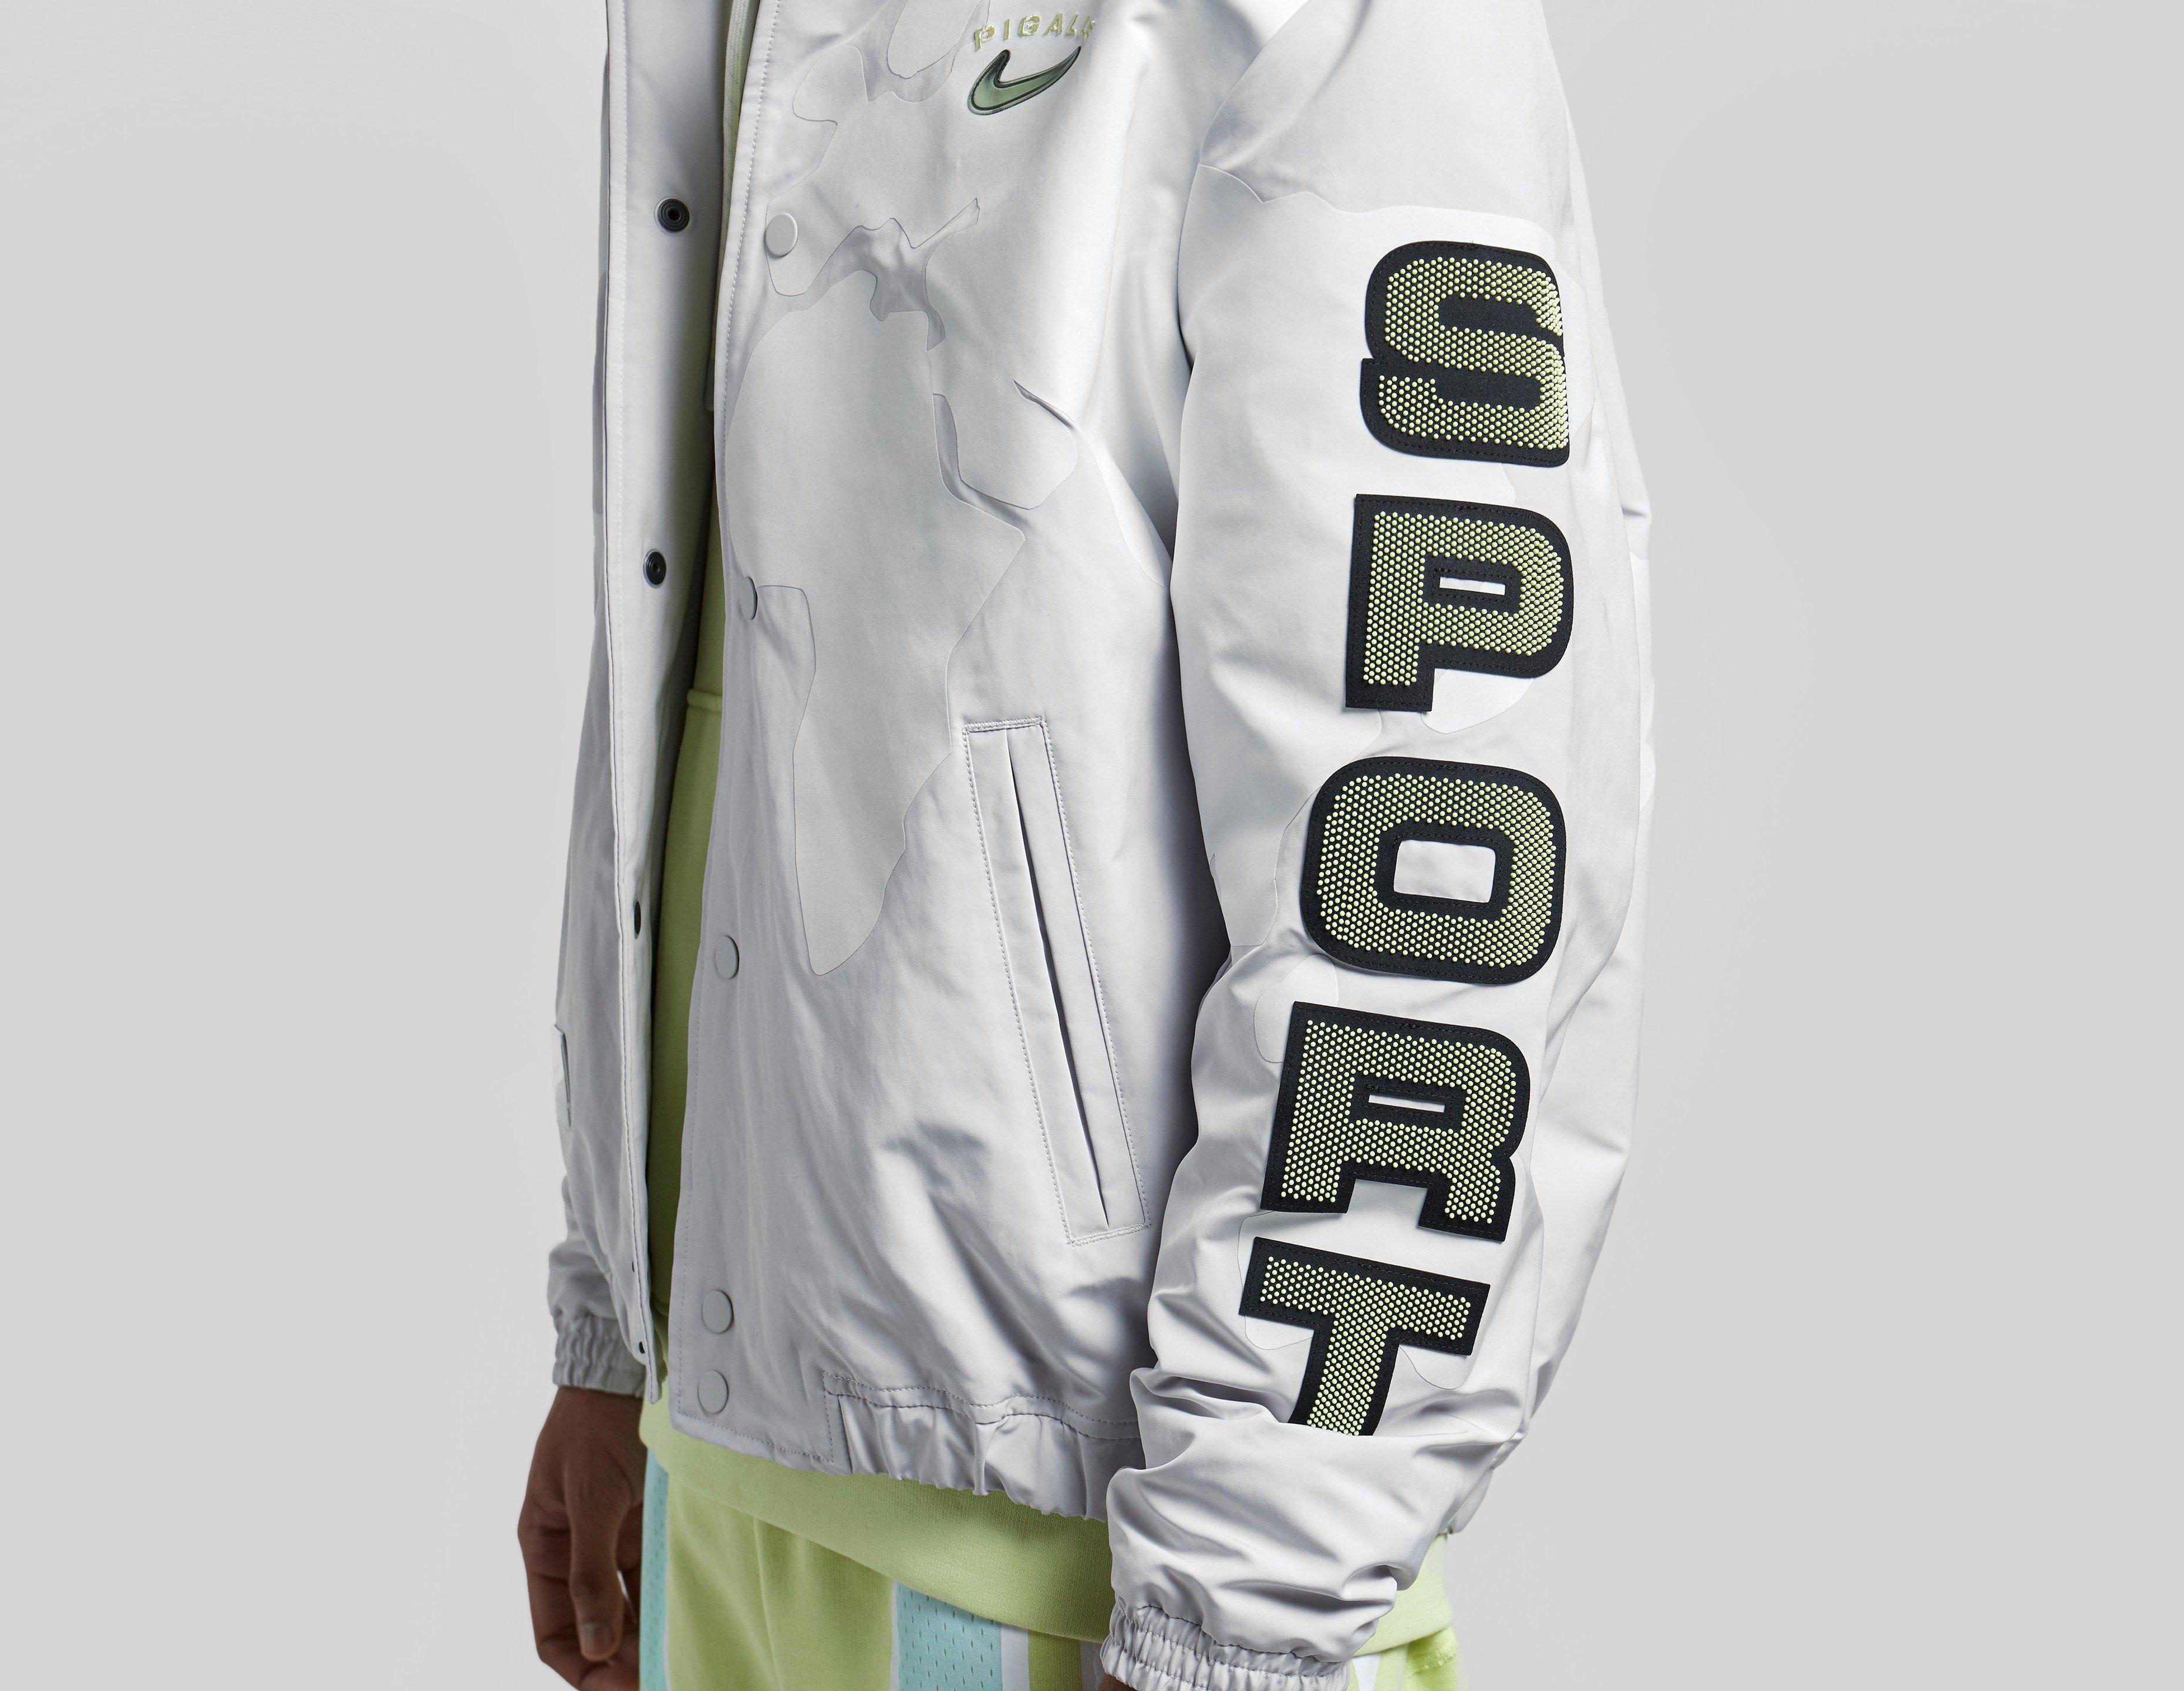 nike x pigalle story jacket